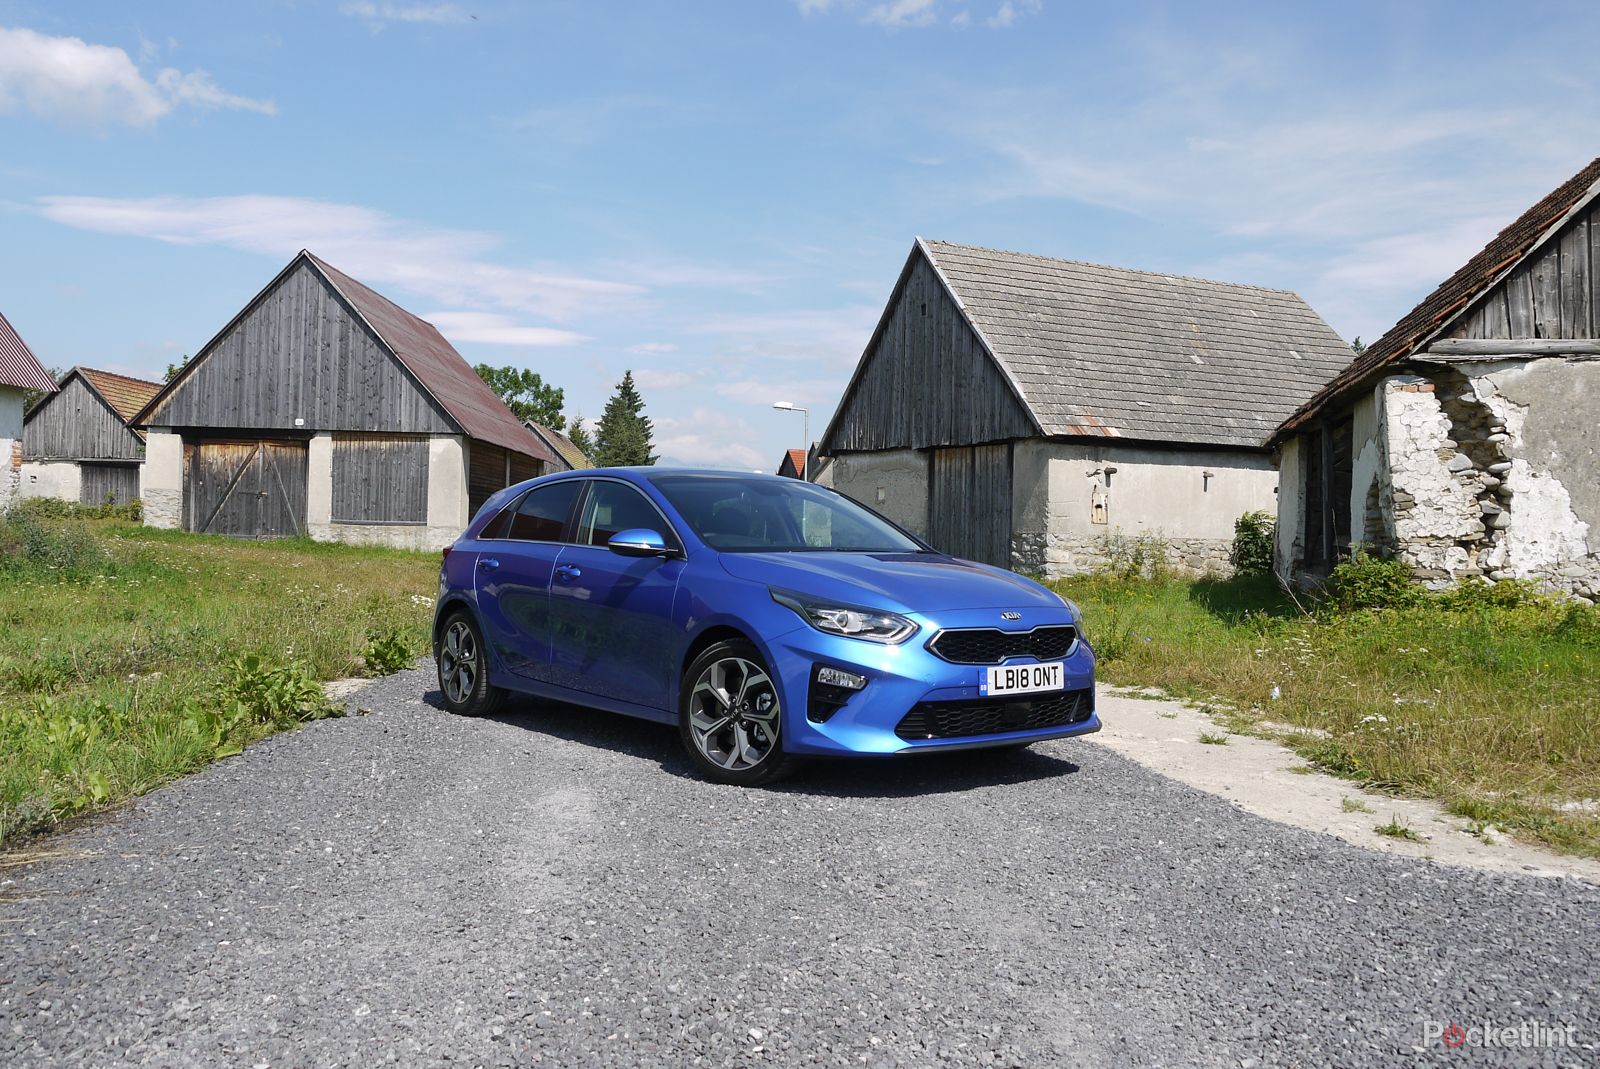 Kia Ceed review: The best family hatchback 2018?